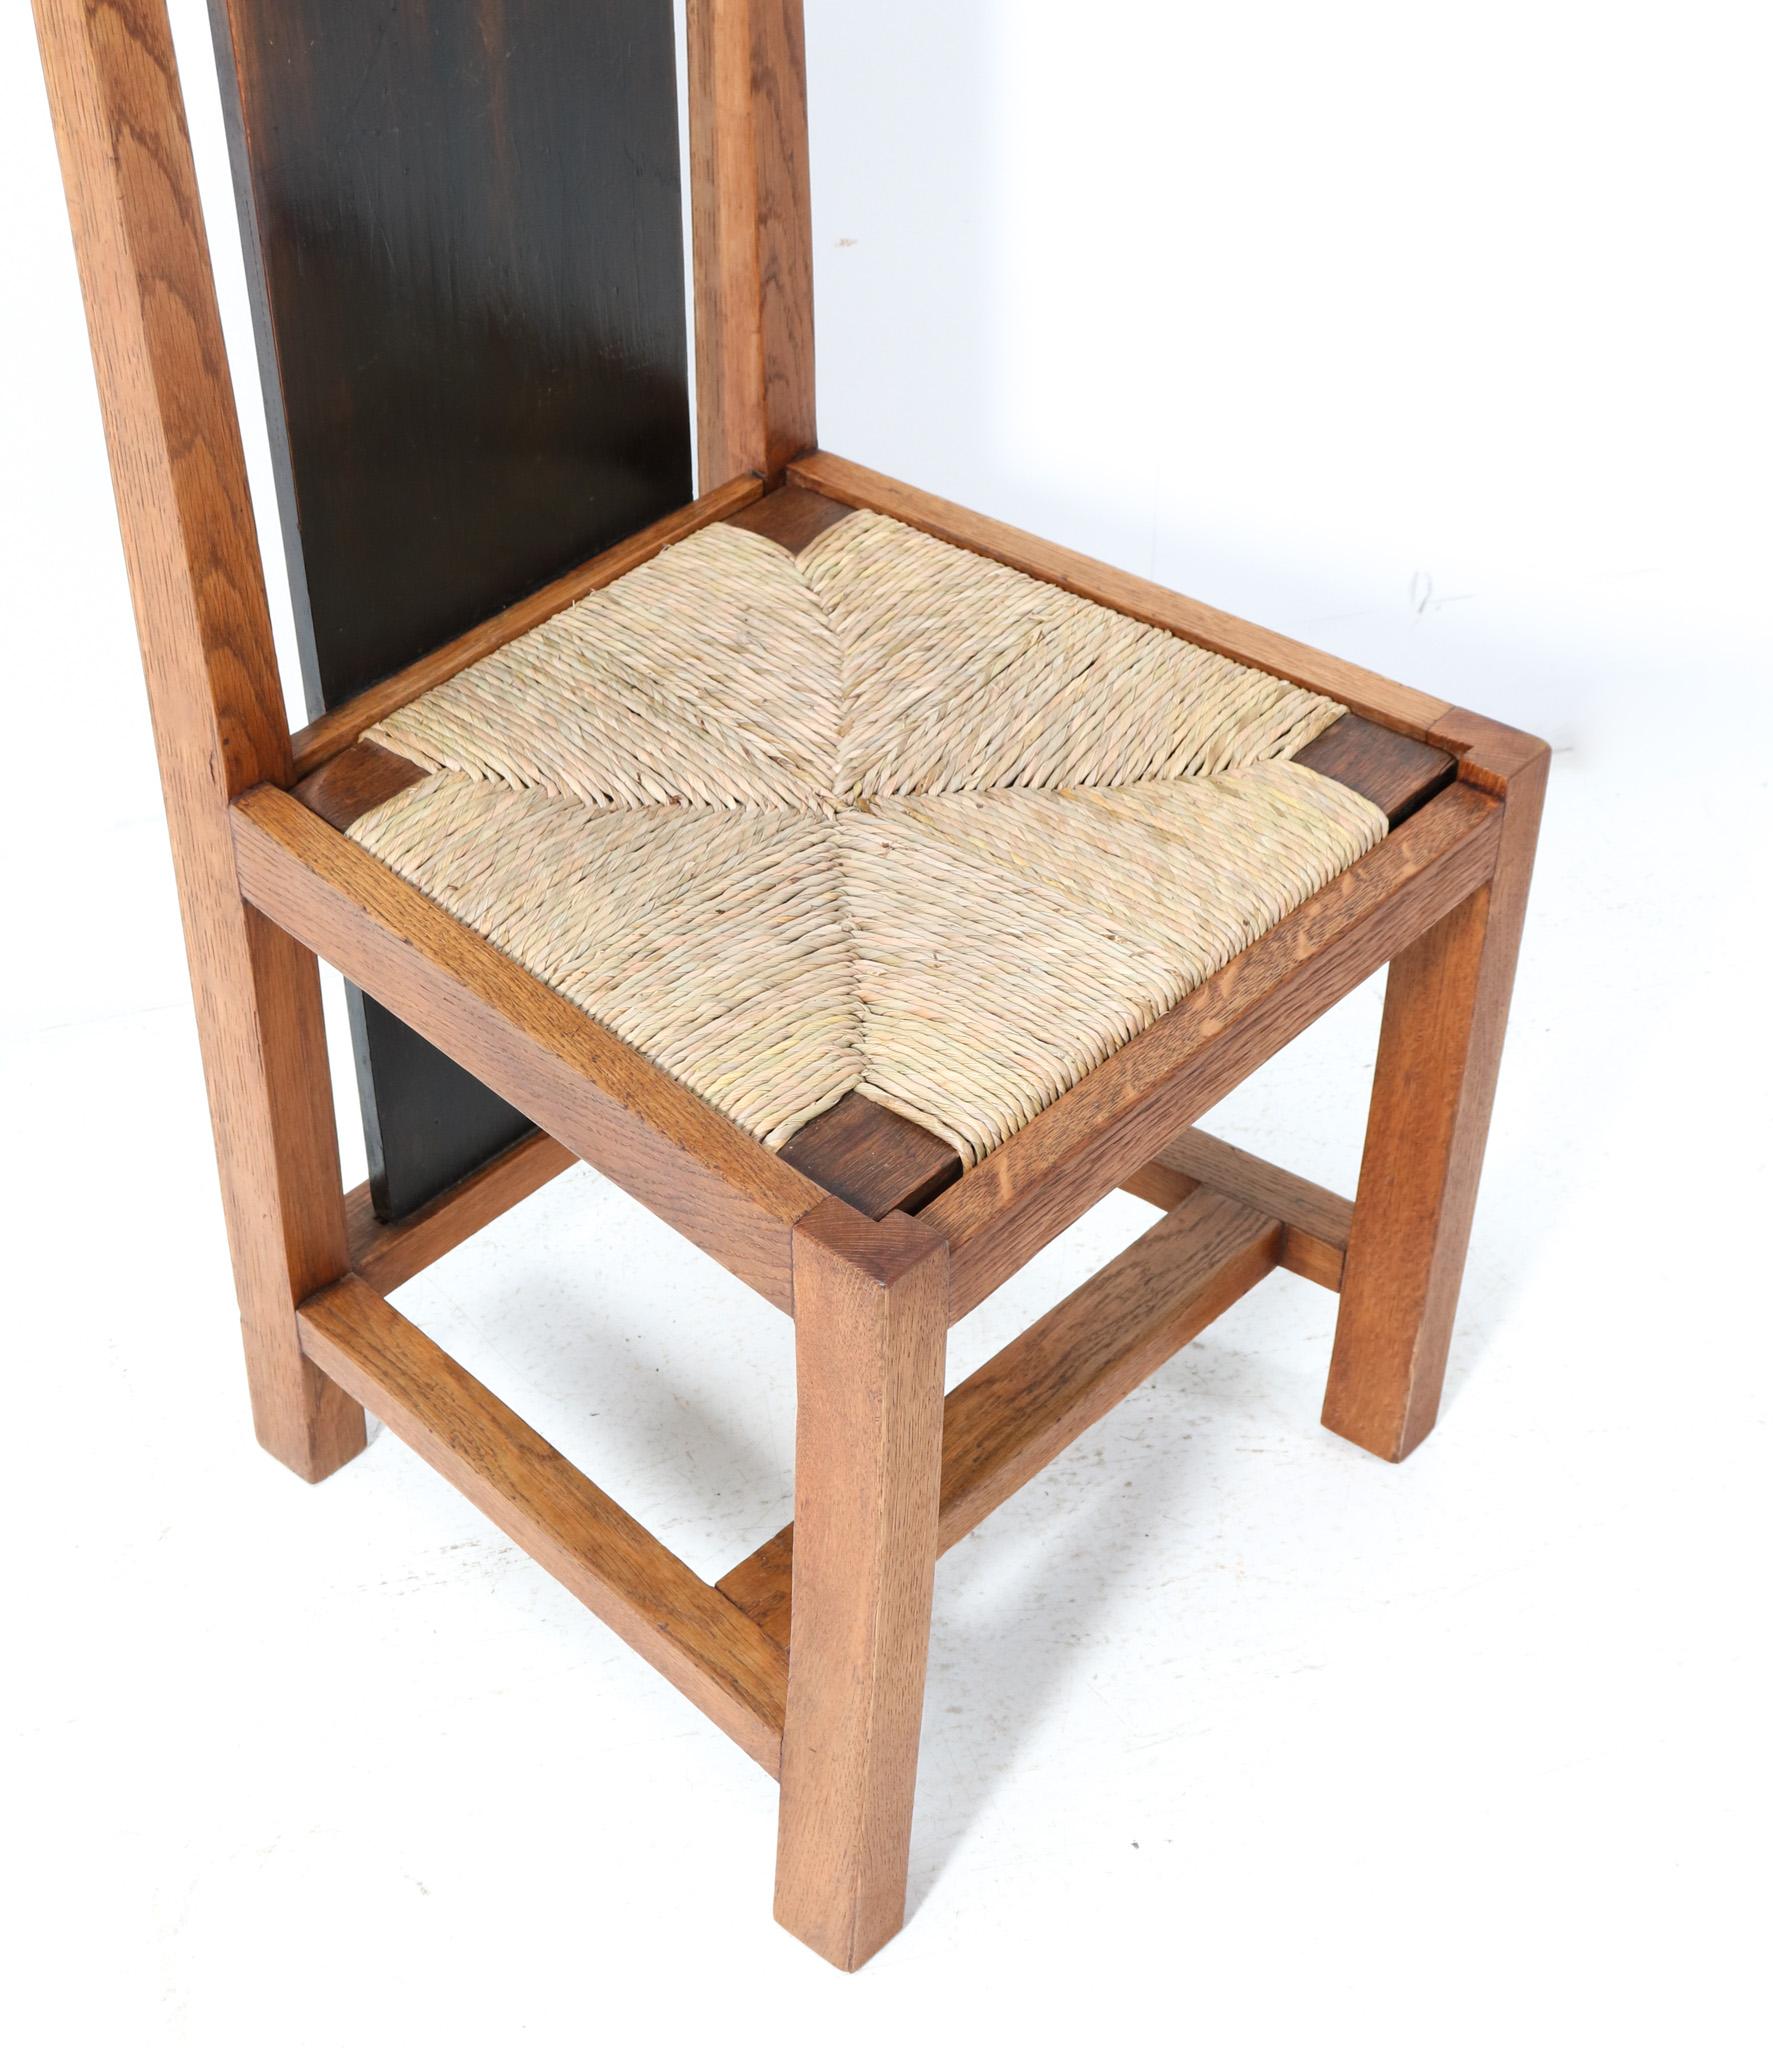  Art Deco Modernist Oak High Back Chair by Cor Alons, 1923 For Sale 2